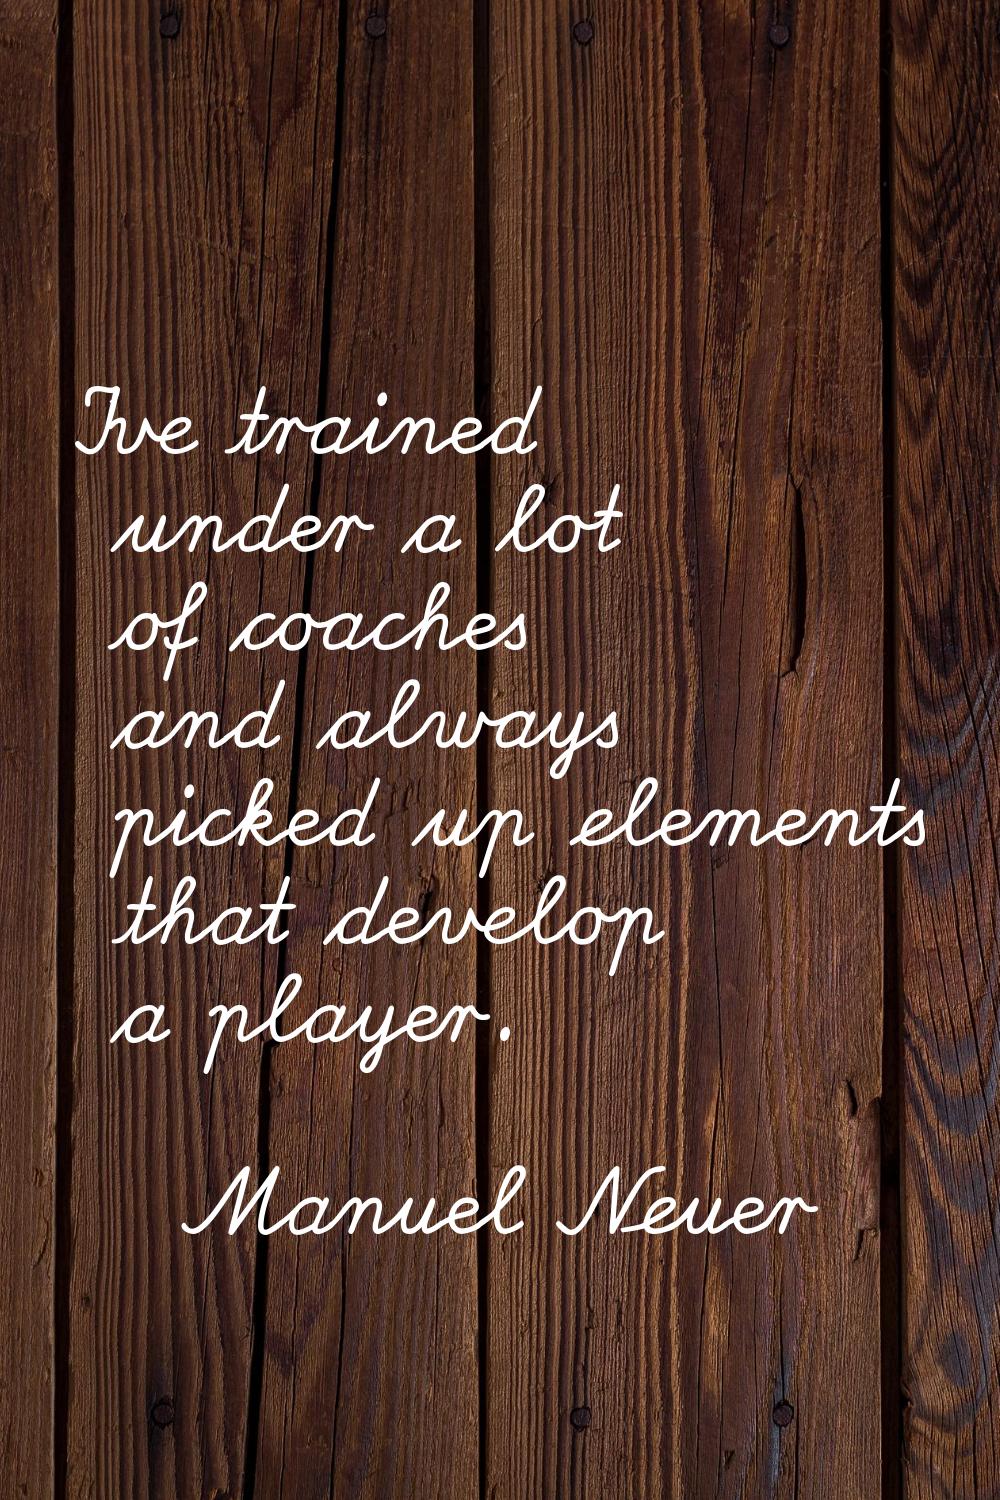 I've trained under a lot of coaches and always picked up elements that develop a player.